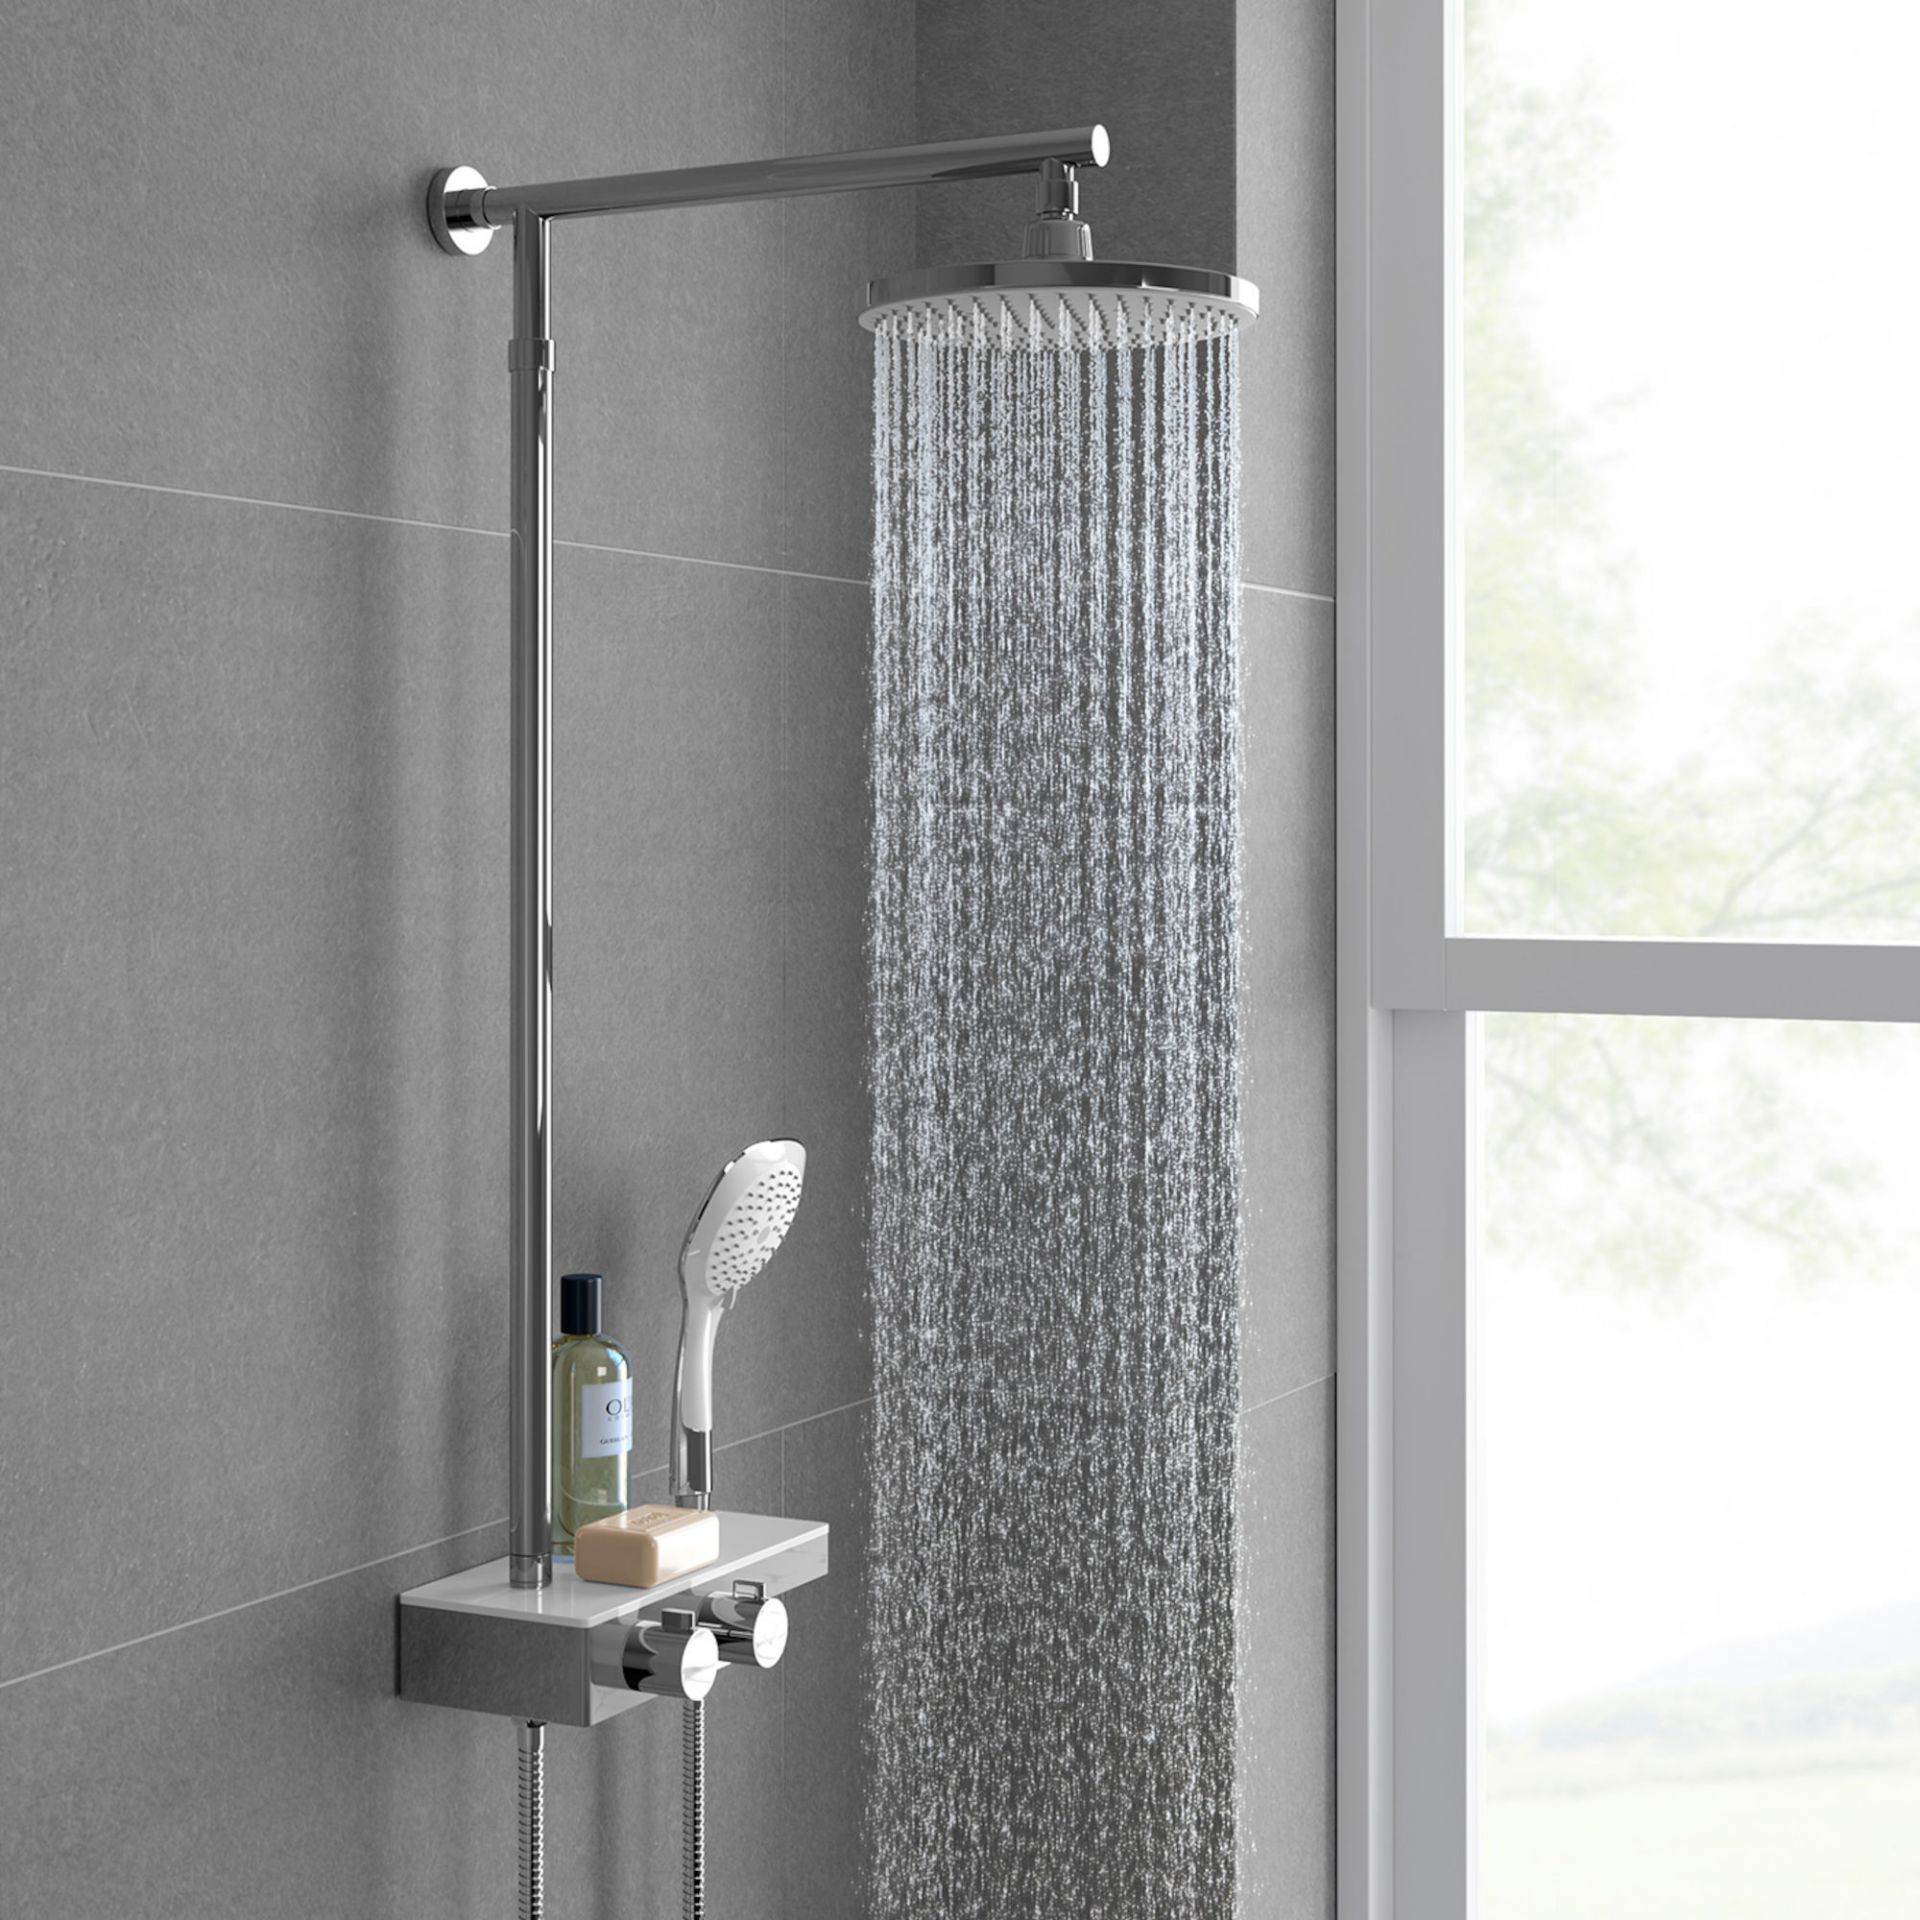 (OS122) Round Exposed Thermostatic Mixer Shower Kit Medium Head & Shelf. RRP £349.99. Cool to